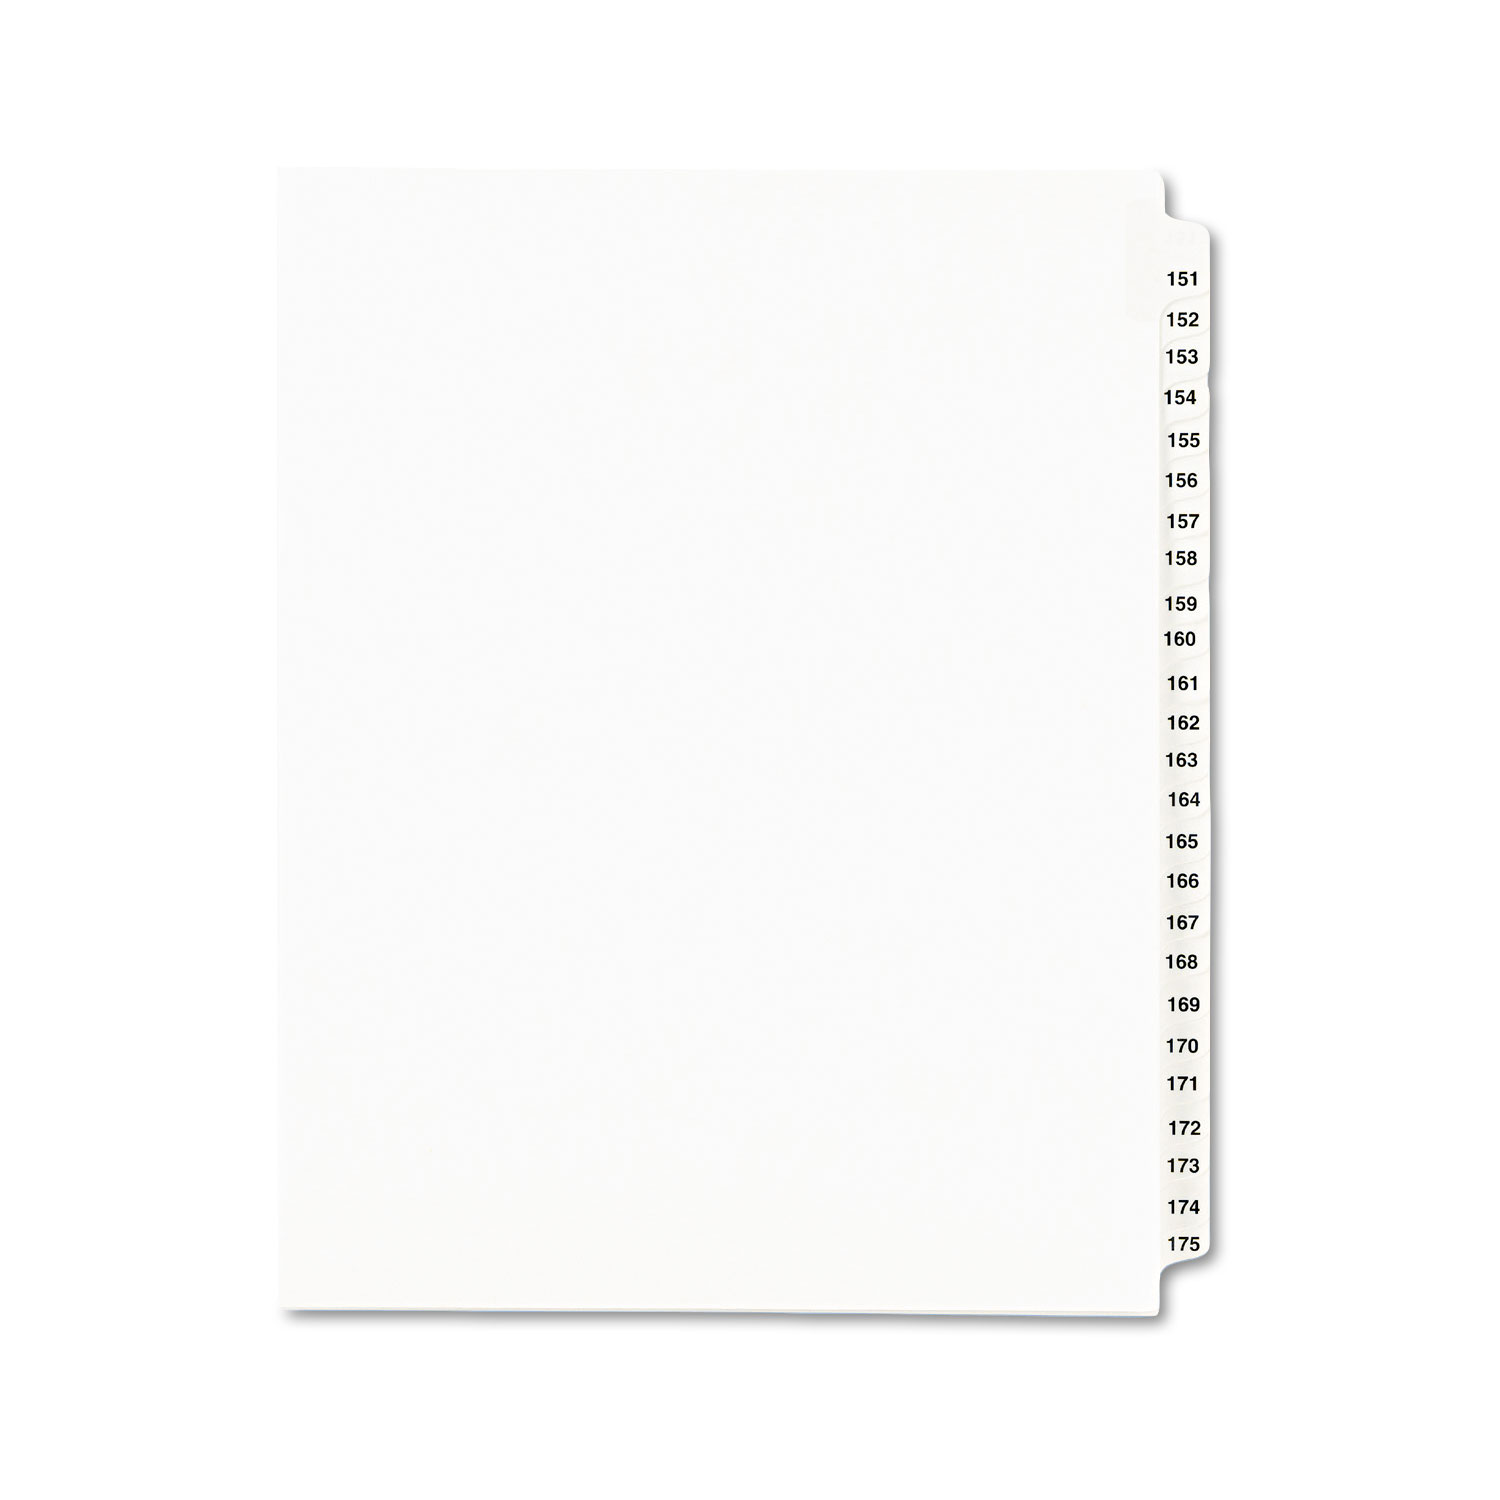  Avery 01336 Preprinted Legal Exhibit Side Tab Index Dividers, Avery Style, 25-Tab, 151 to 175, 11 x 8.5, White, 1 Set (AVE01336) 